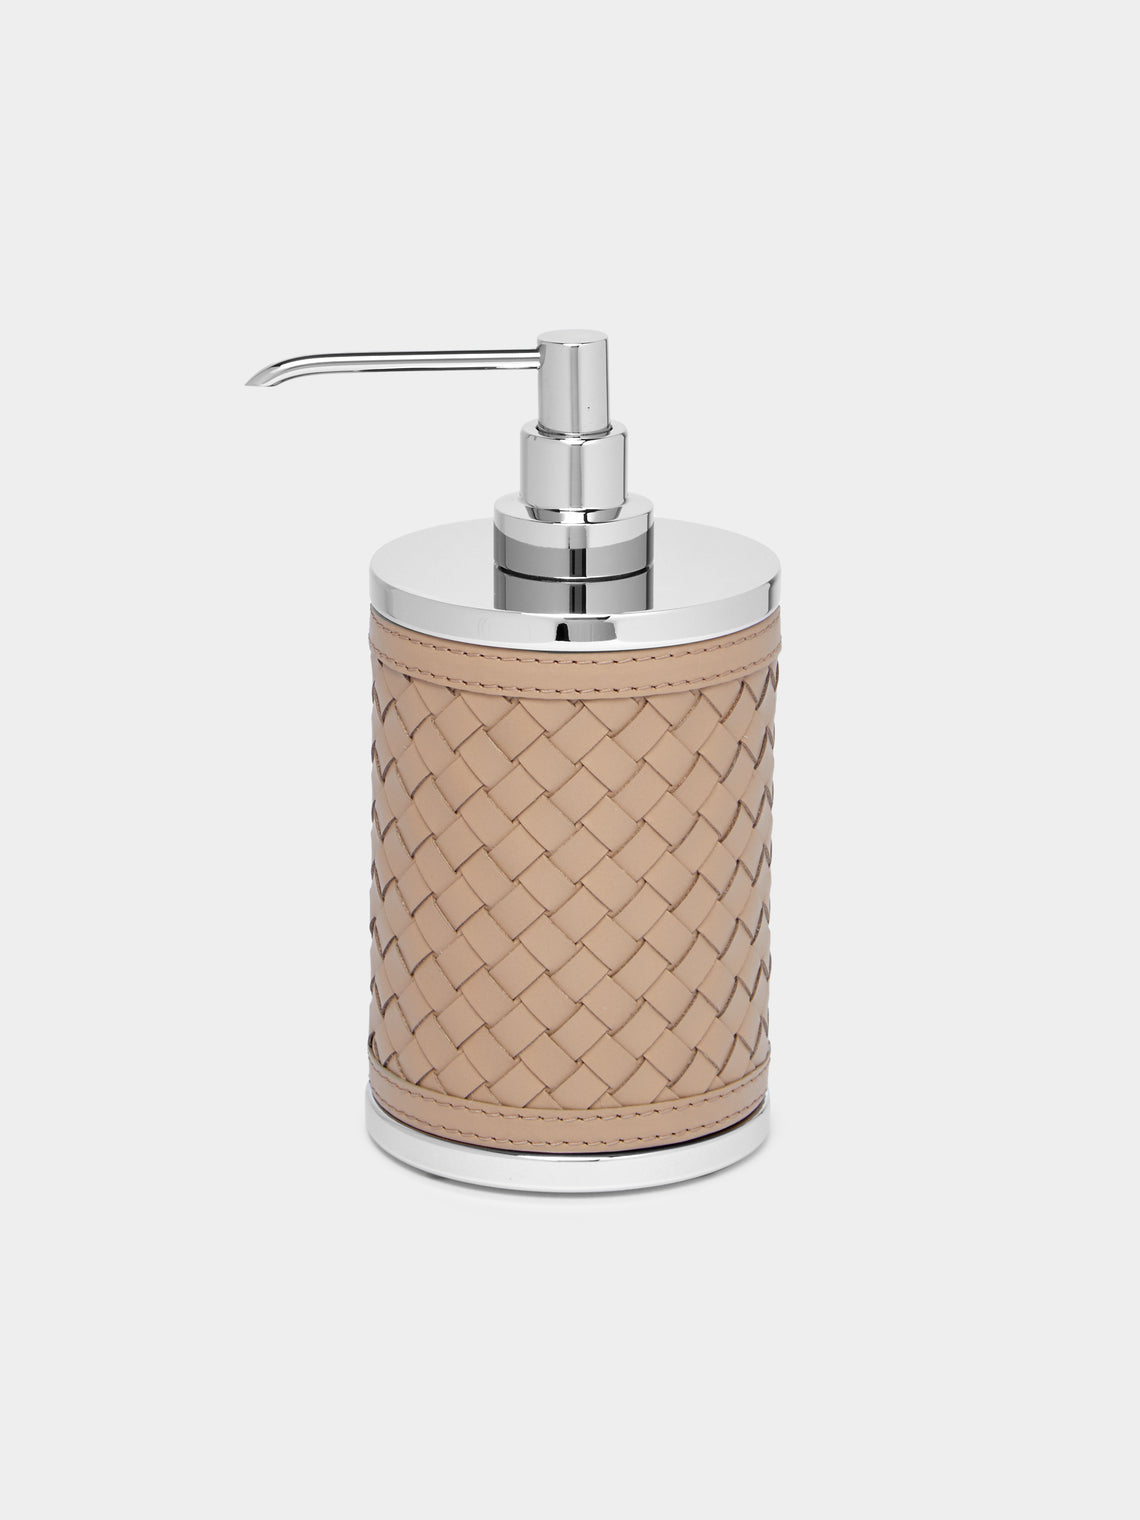 Riviere - Woven Leather Soap Dispenser -  - ABASK - 